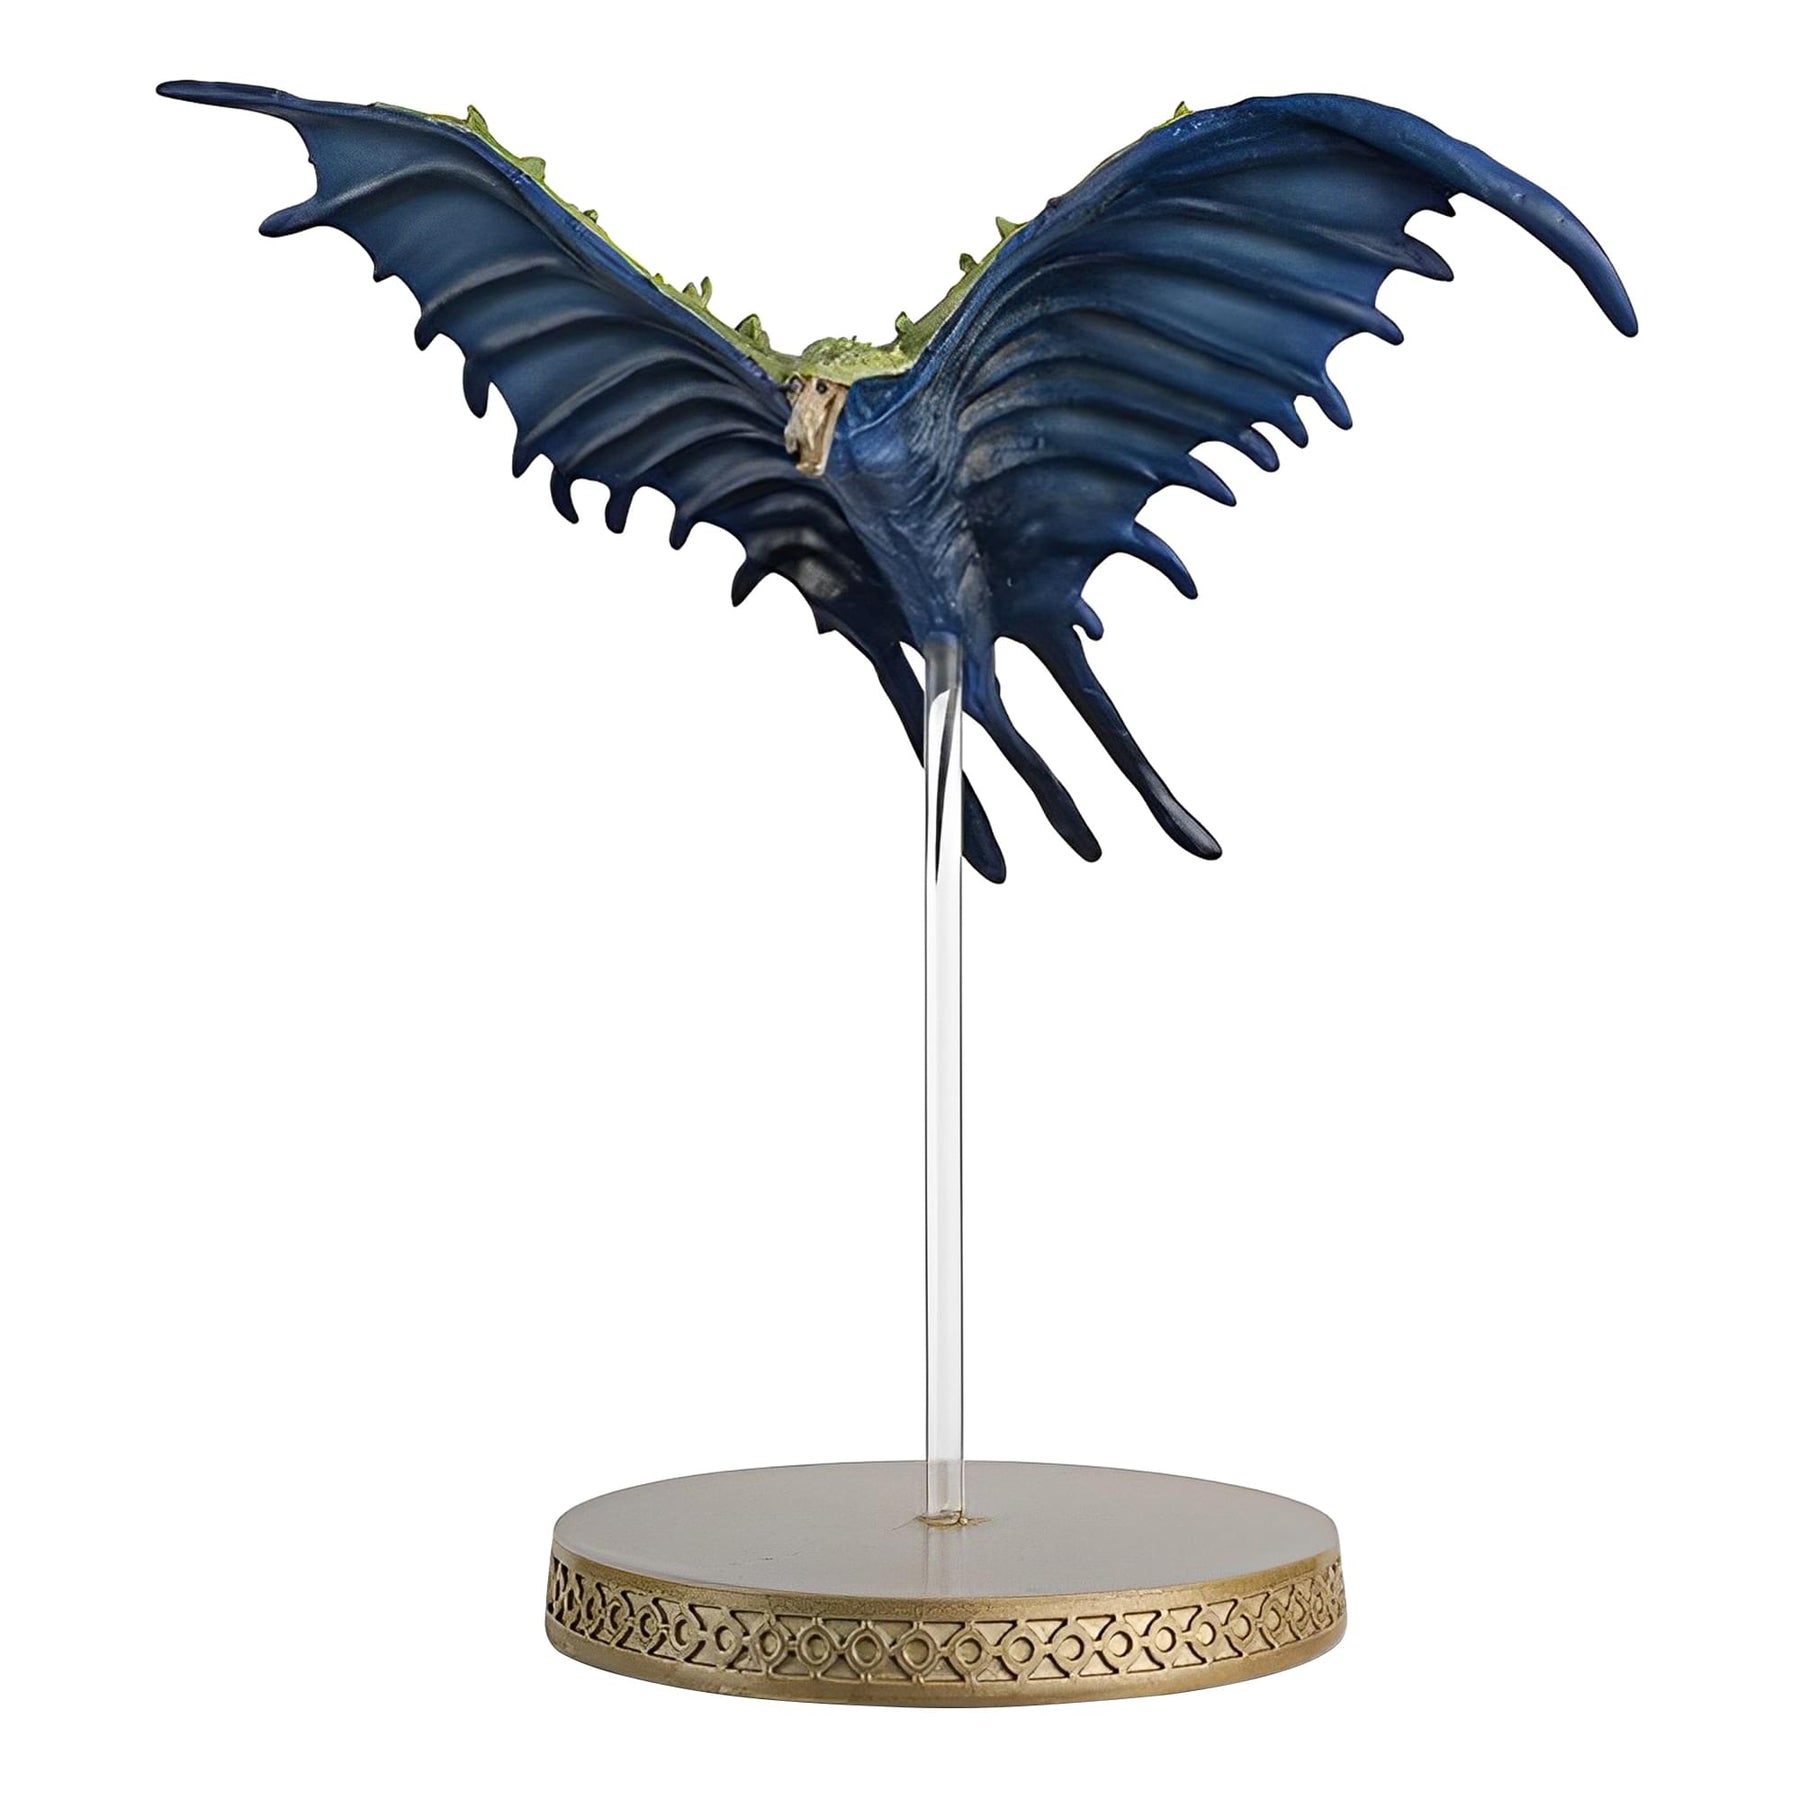 Harry Potter Wizarding World 1:16 Scale Figure | 012 Swooping Evil